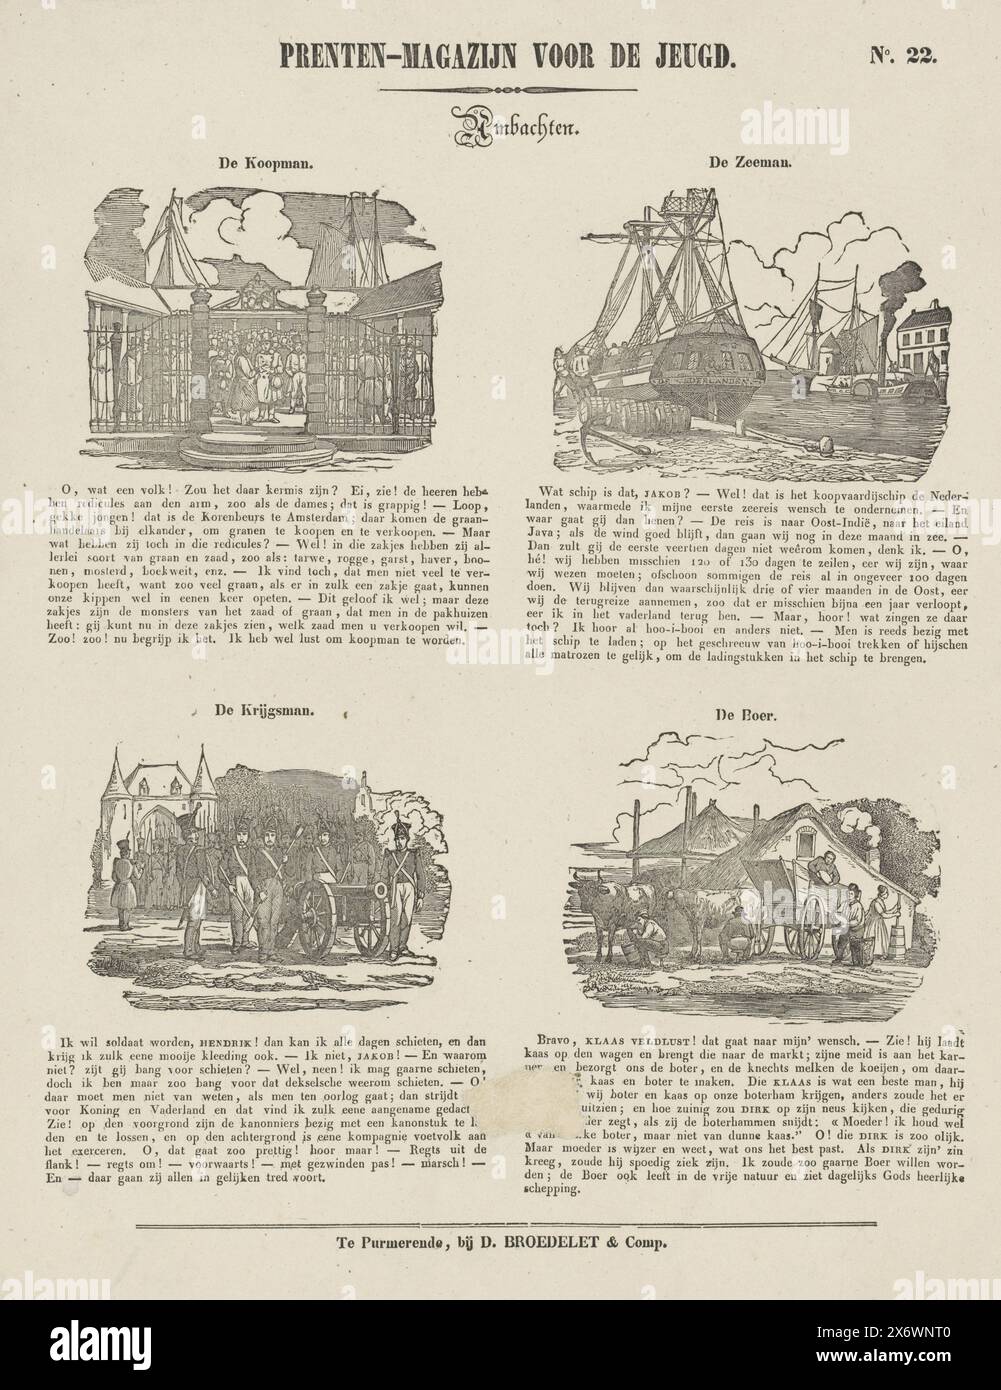 Merchant, sailor, soldier and farmer, Print magazine for youth (series title on object), Crafts (series title on object), Sheet with 4 representations of professions: a merchant, a sailor, a soldier and a farmer. A title above each performance, ten to twelve lines of text below each performance. Numbered top right: No. 21., print, publisher: Daniël Broedelet, (mentioned on object), print maker: anonymous, Purmerend, 1839 - 1841, paper, wood engraving, letterpress printing, height, 417 mm × width, 335 mm Stock Photo